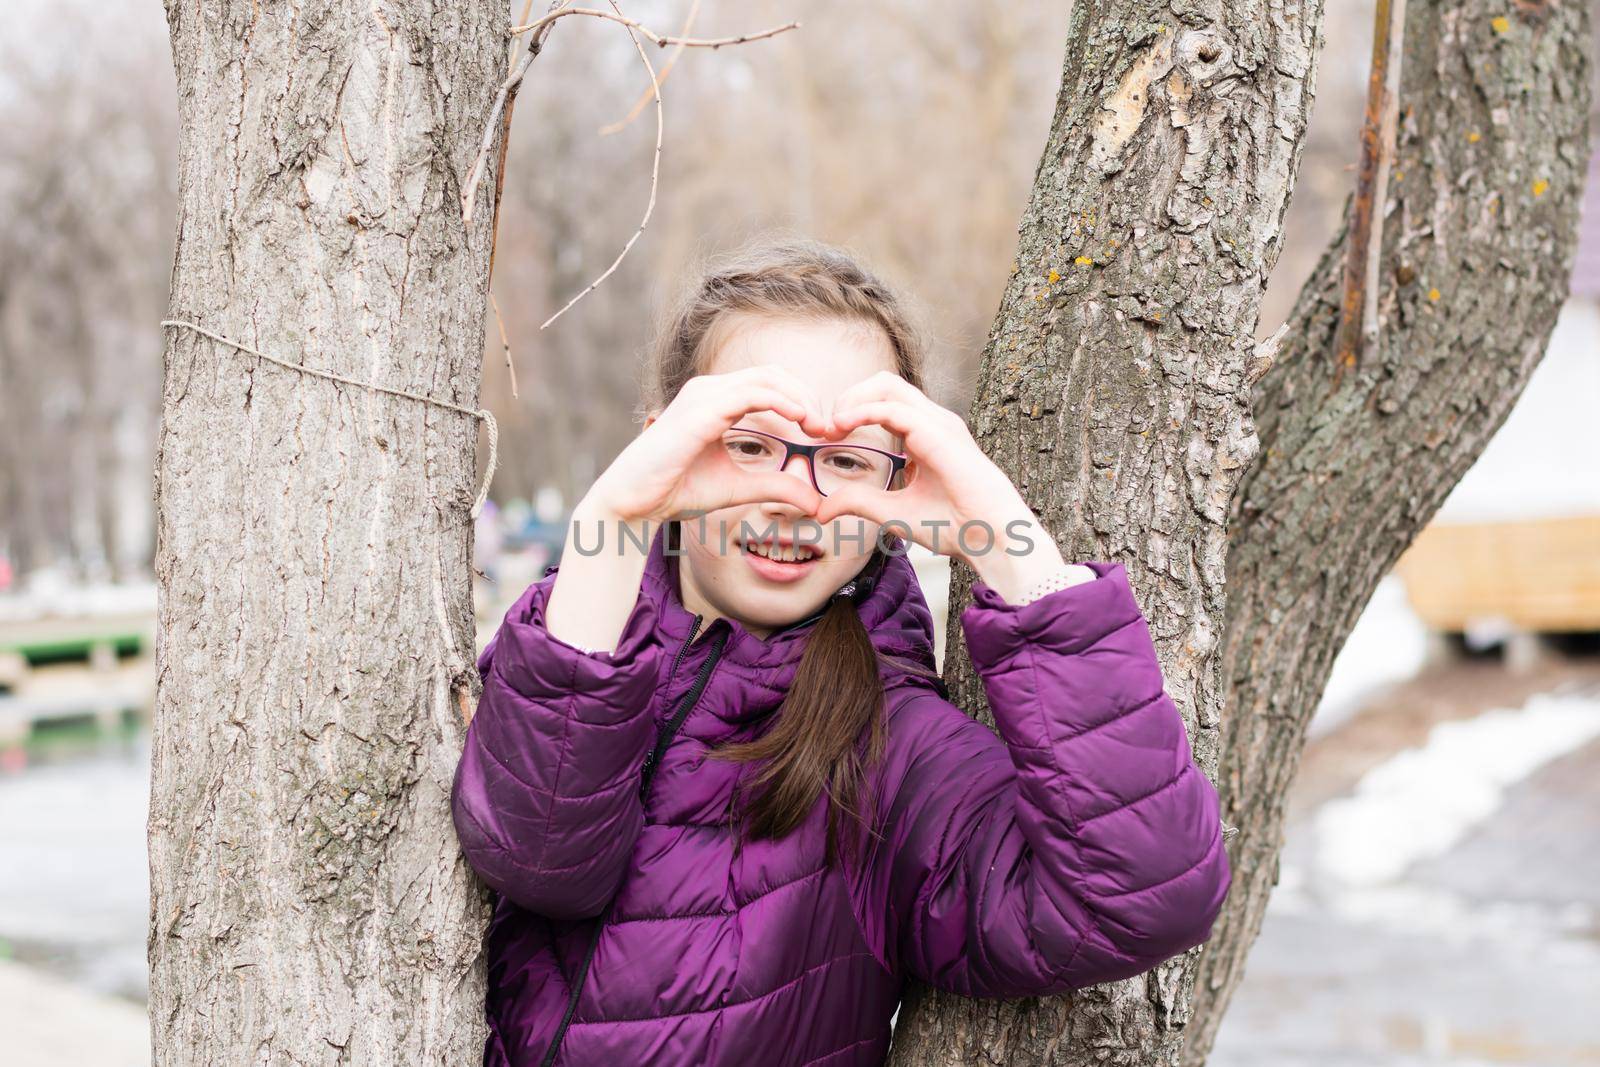 Young attractive girl in glasses makes a heart shape with her palms in front of her face in a city park in early spring